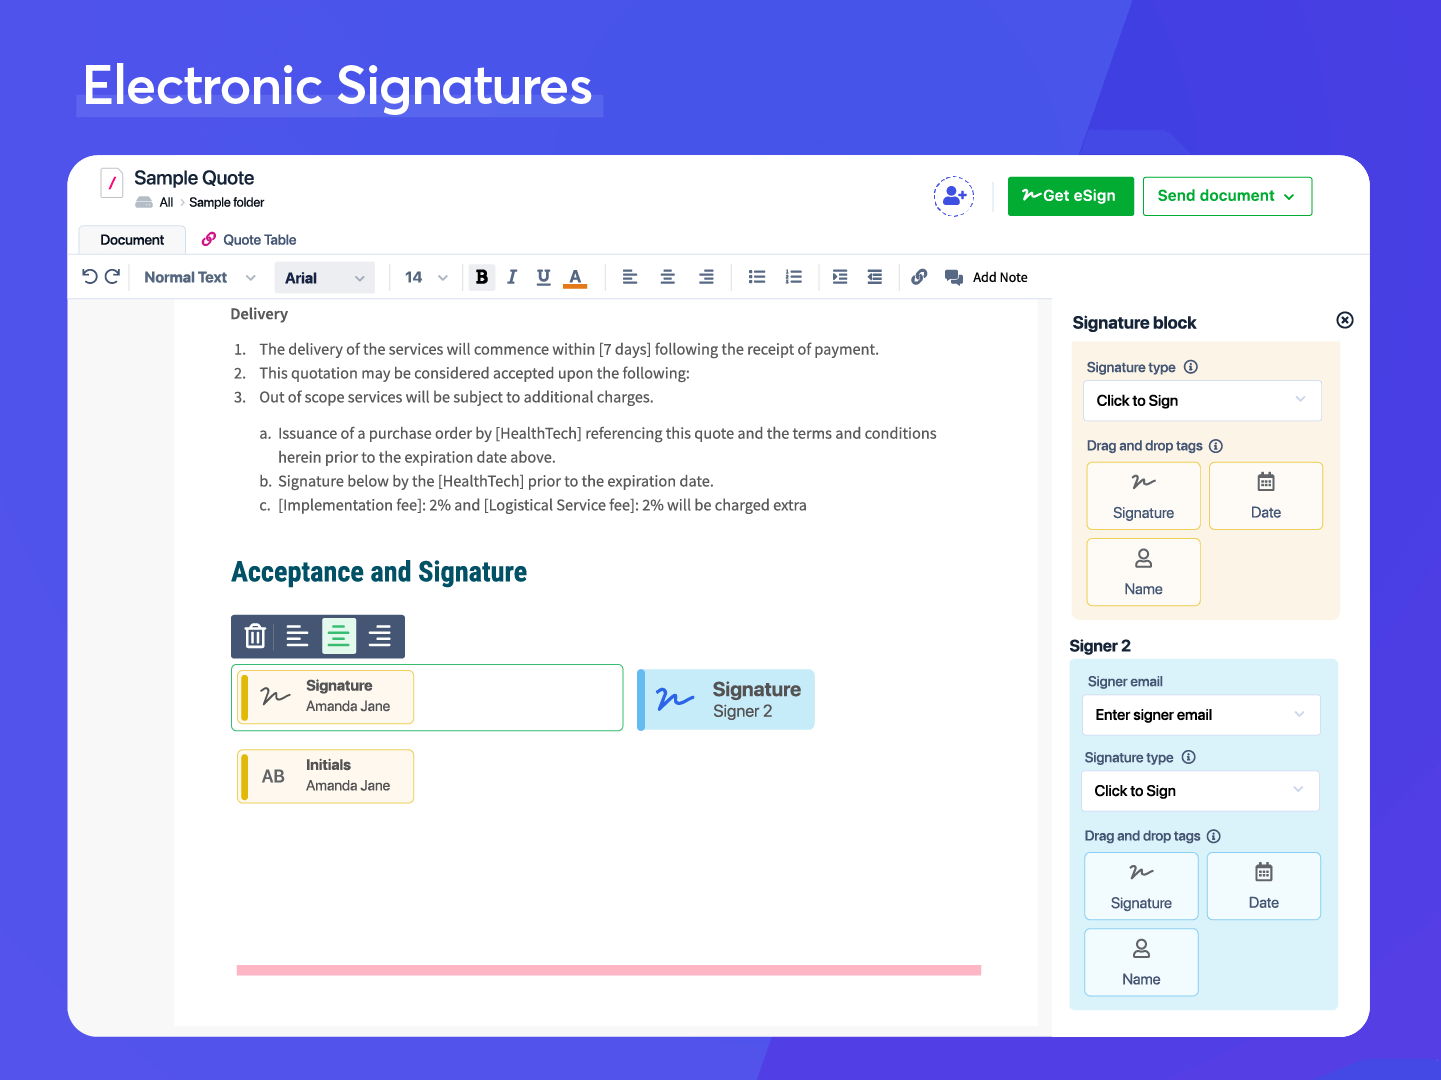 ELECTRONIC SIGNATURES - Add signature blocks and signer details to request eSignatures on your documents. Recipients get notified via email to fill and sign documents from their mobile or desktop.